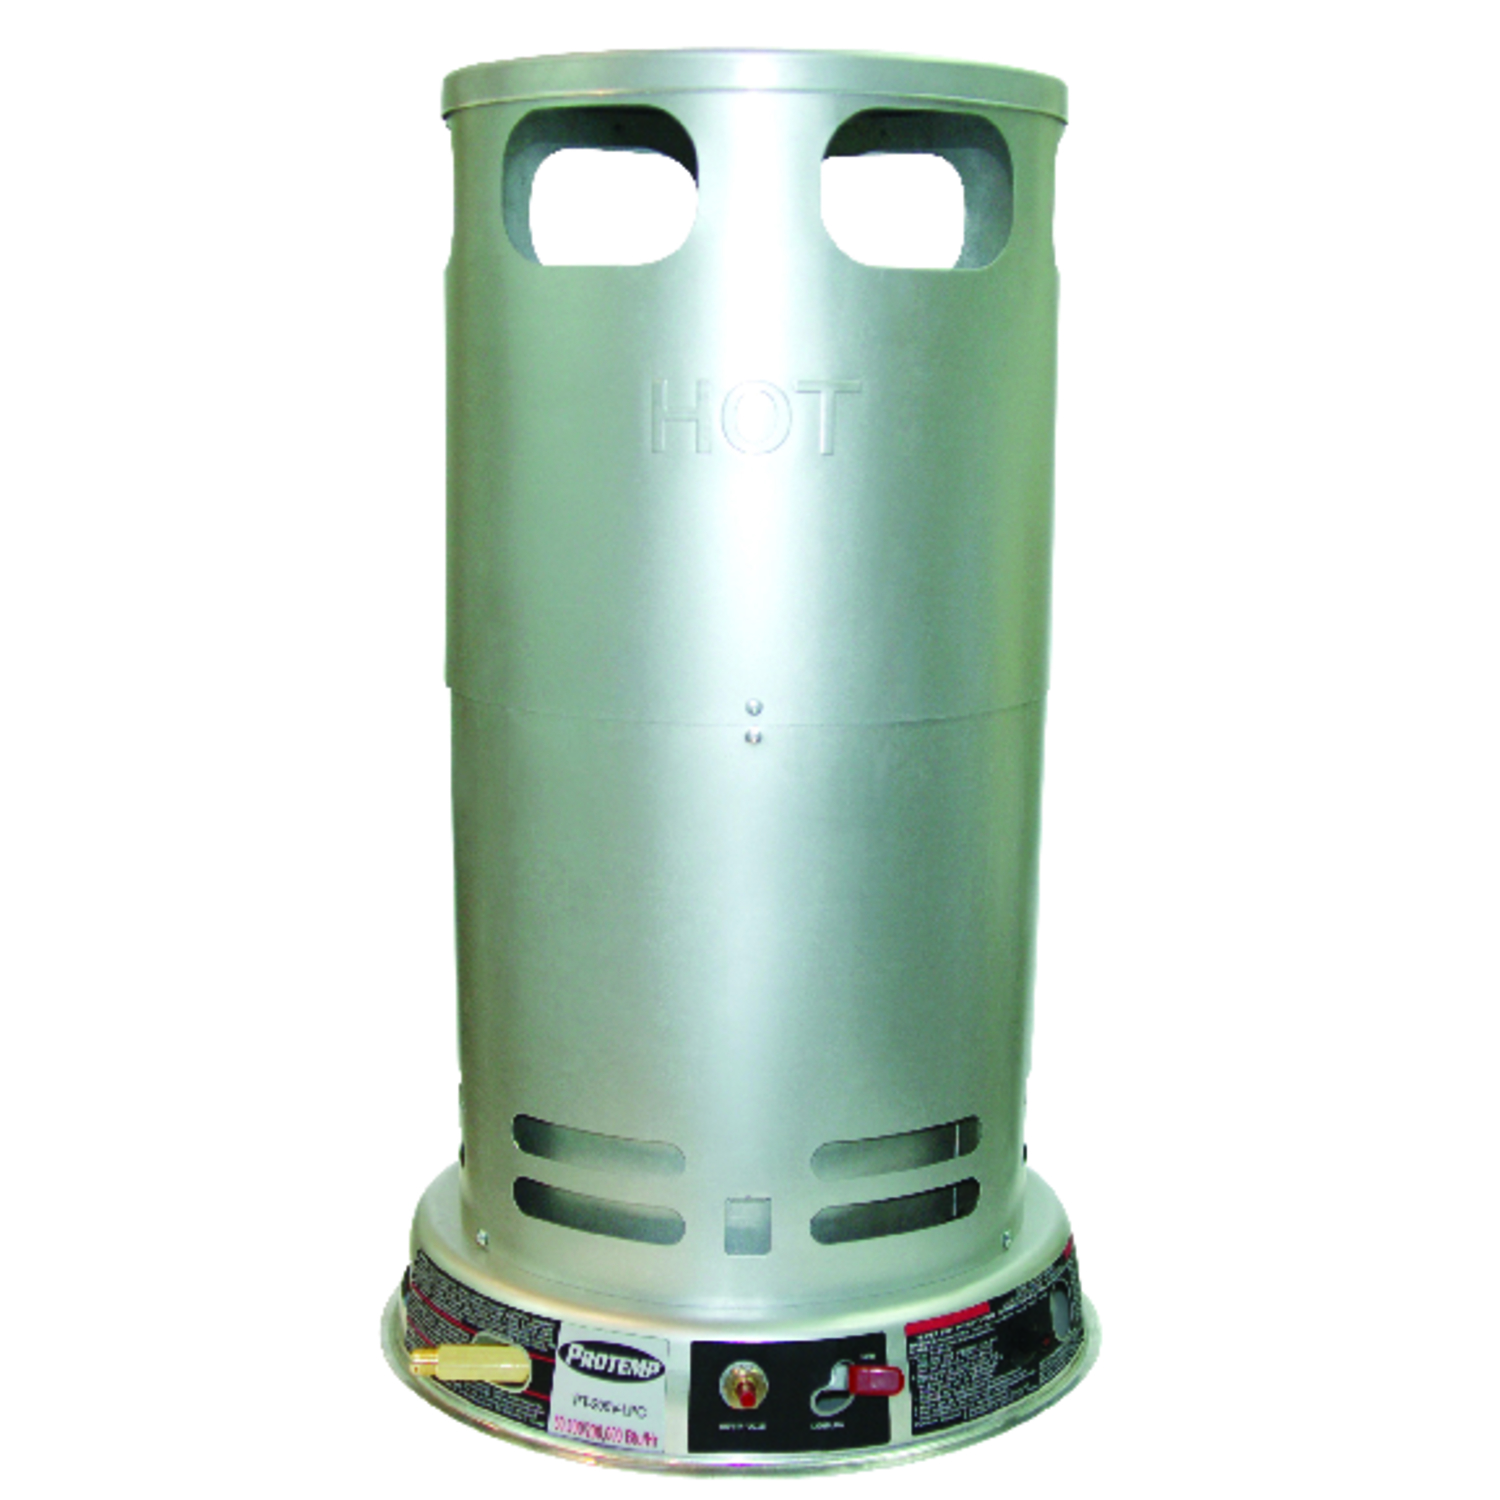 UPC 657888052005 product image for Protemp 5000 sq. ft. Propane Convection Heater | upcitemdb.com